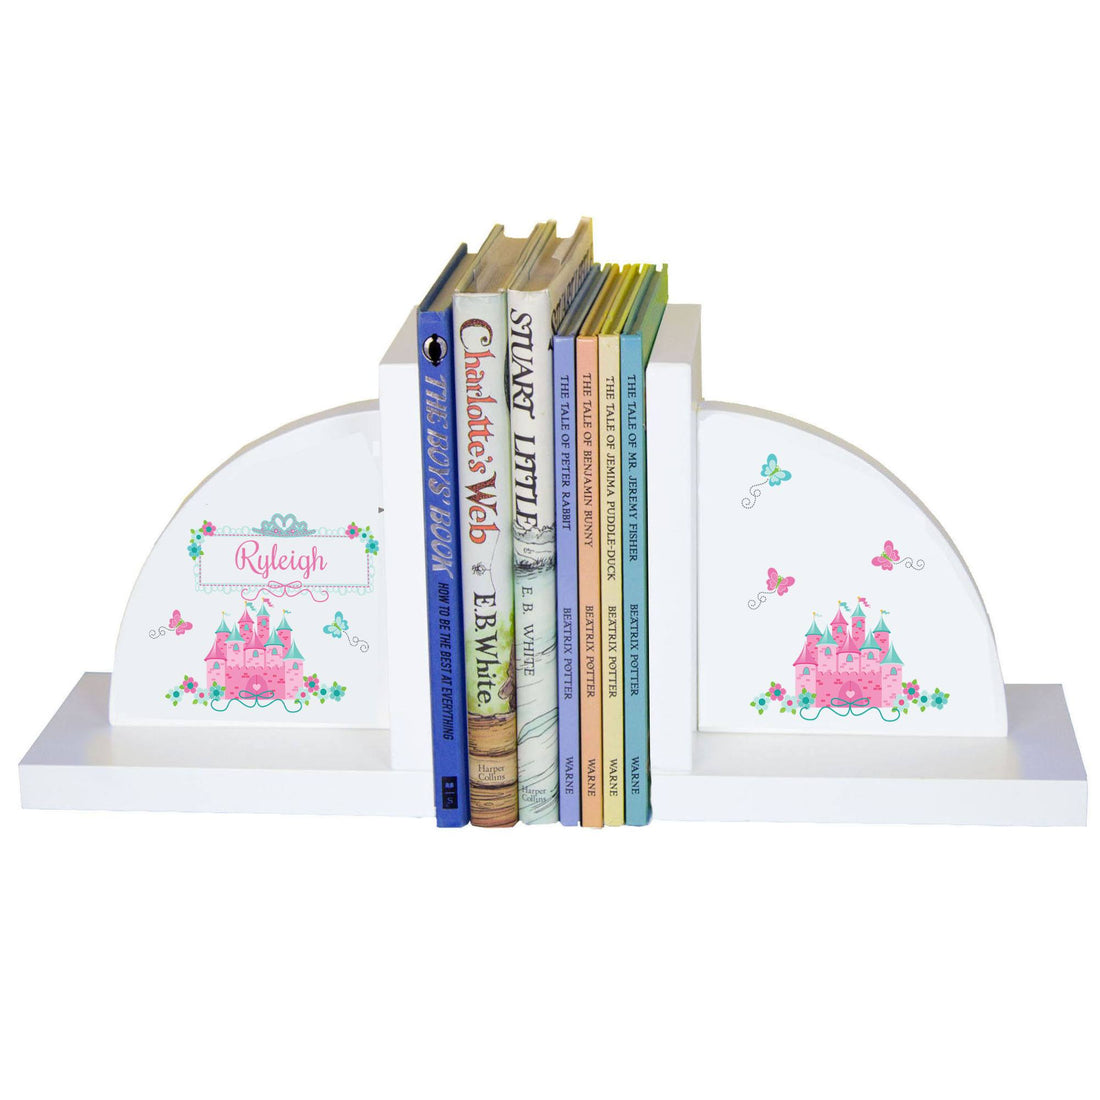 Personalized White Bookends with Pink Teal Castle design